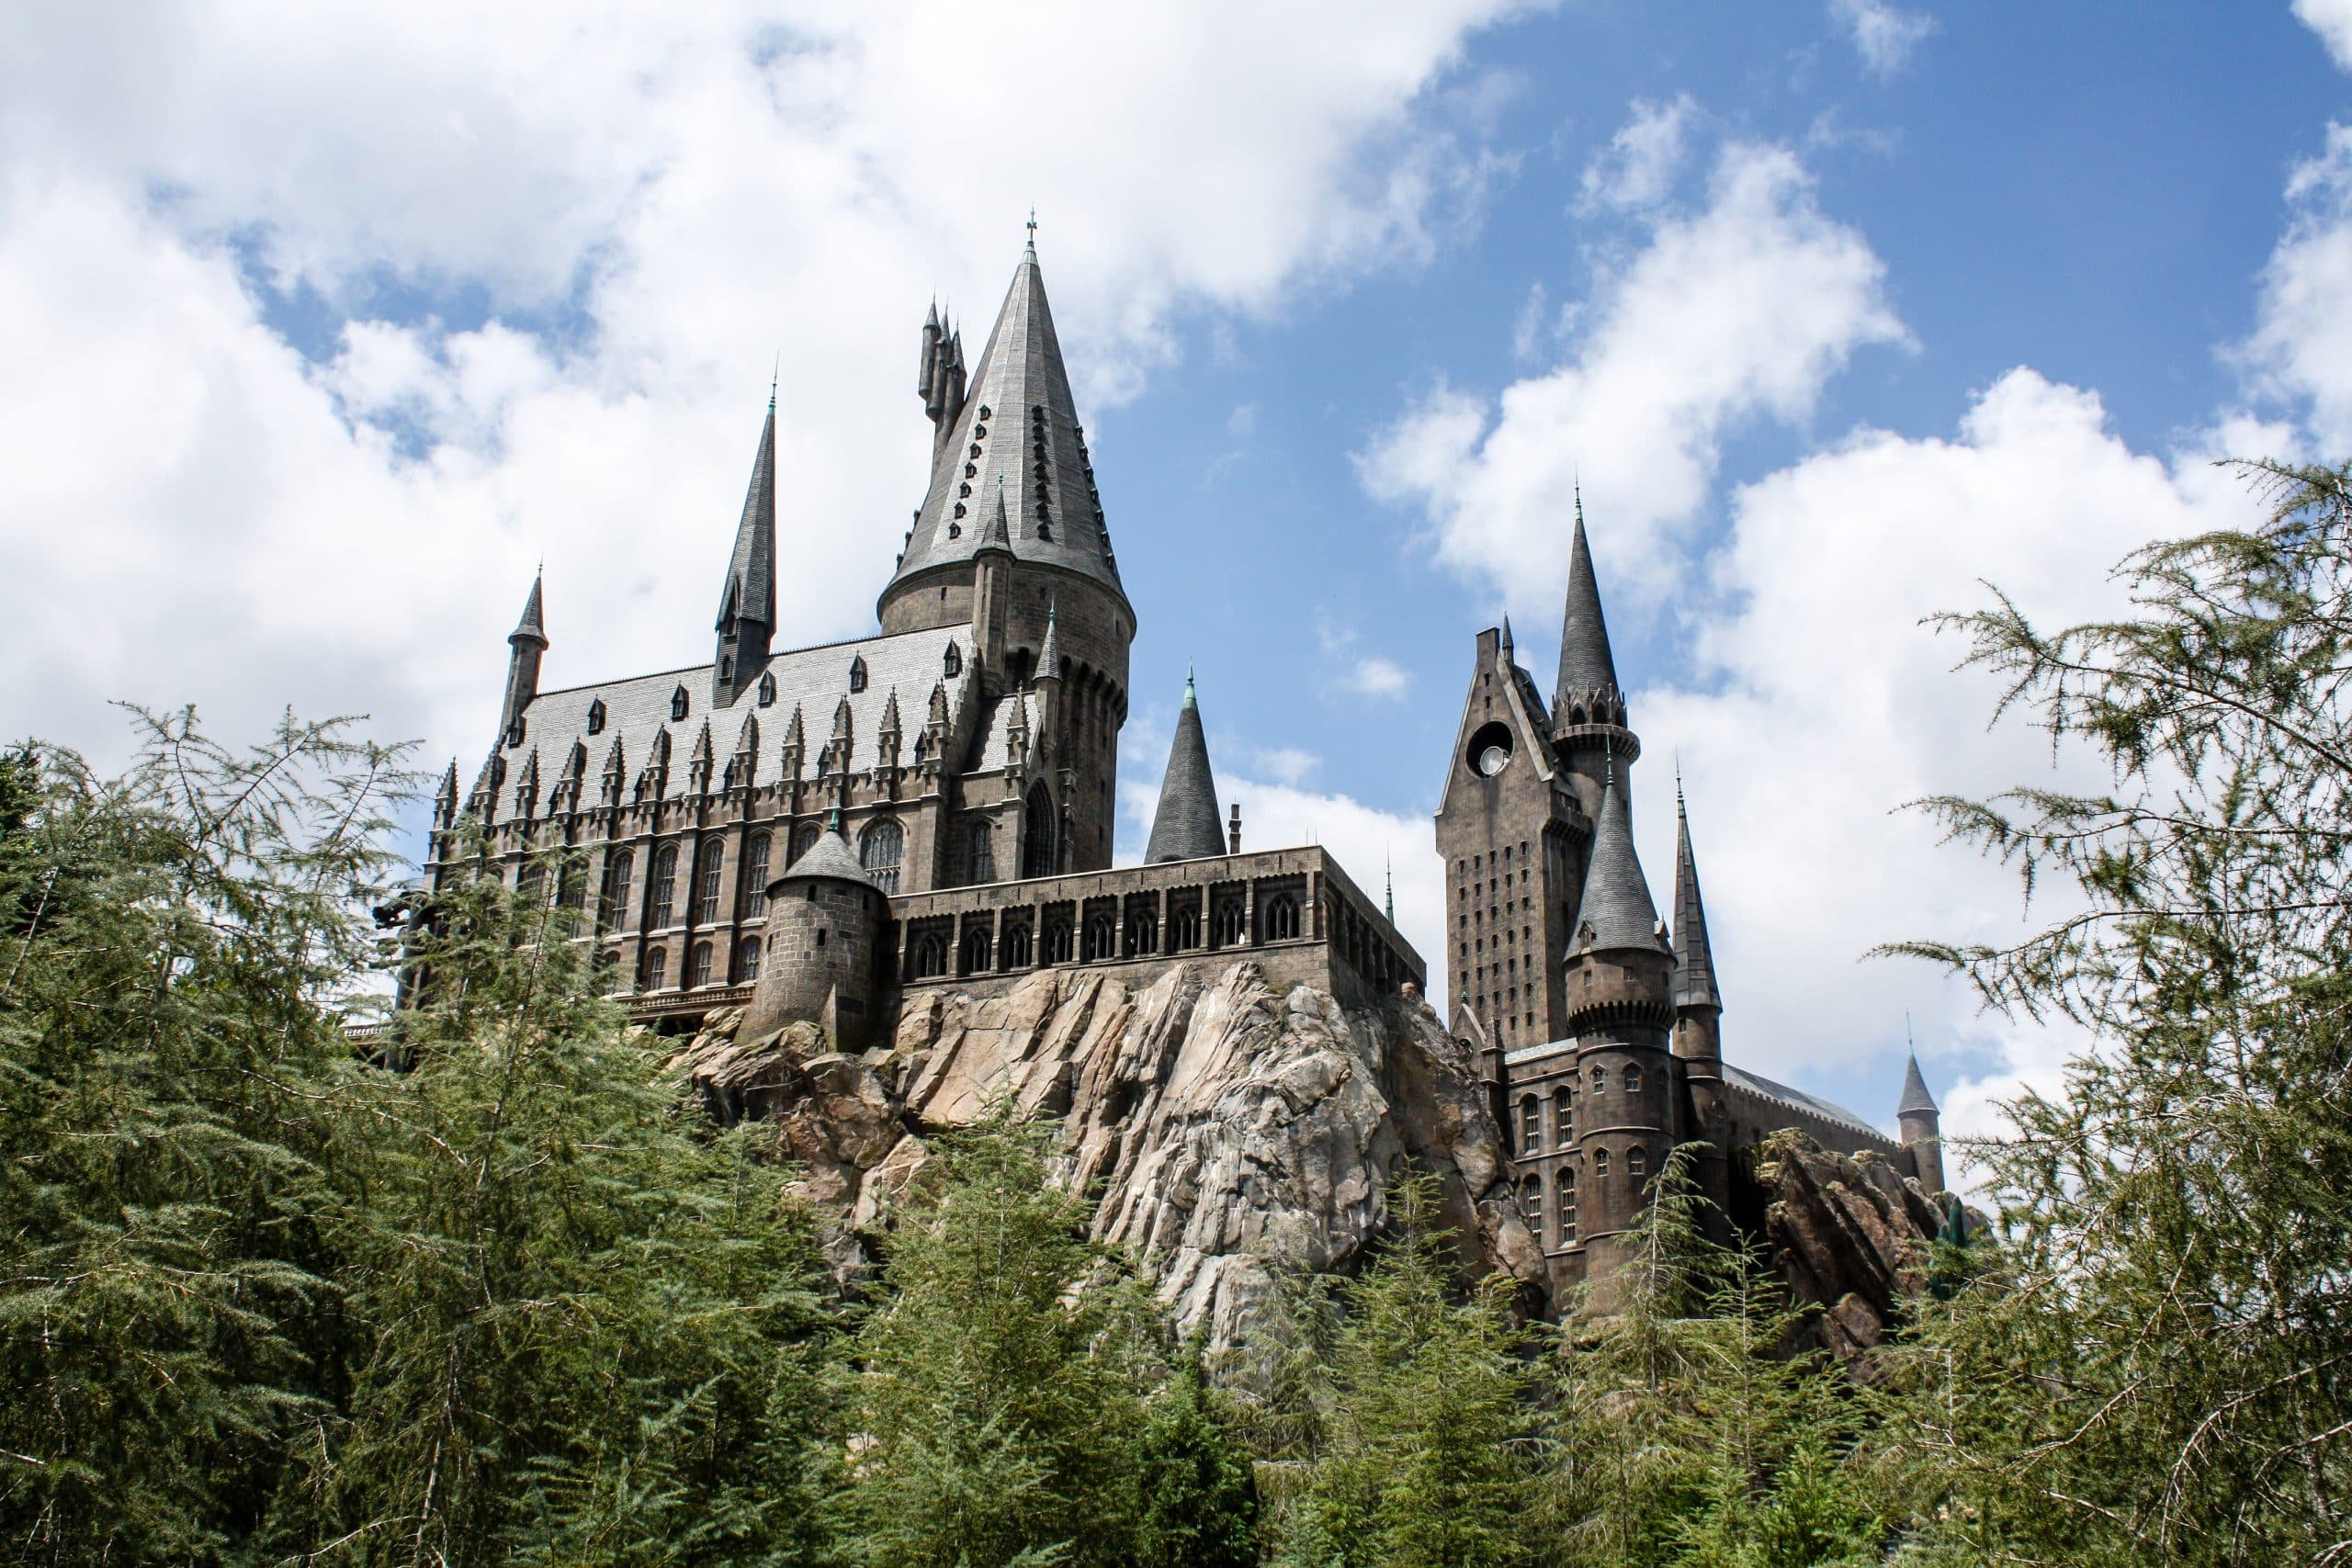 Exploring The Wizarding World Of Harry Potter: Hogsmeade